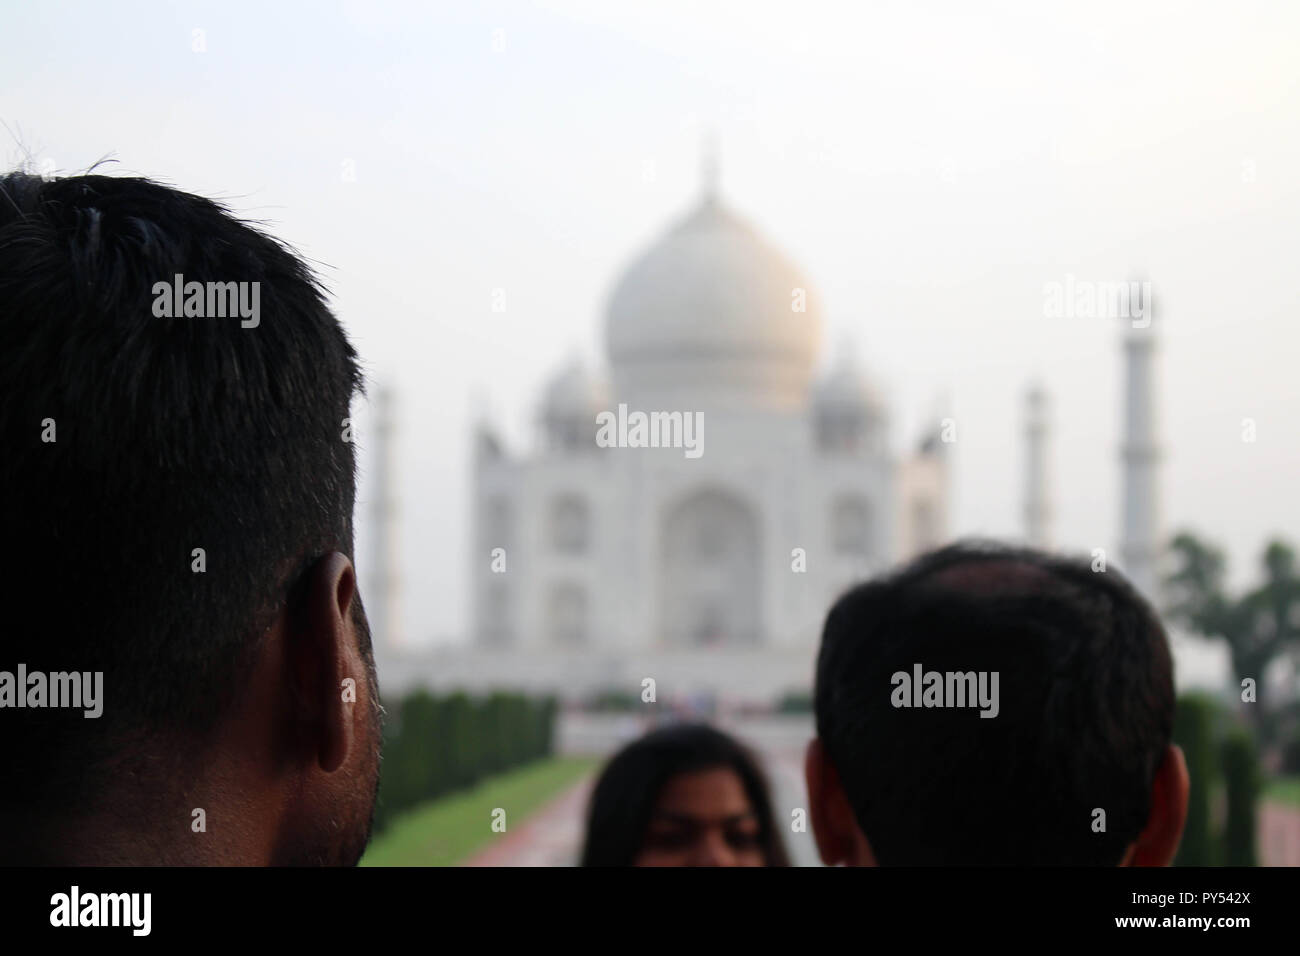 Taj mahal in august hi-res stock photography and images - Alamy